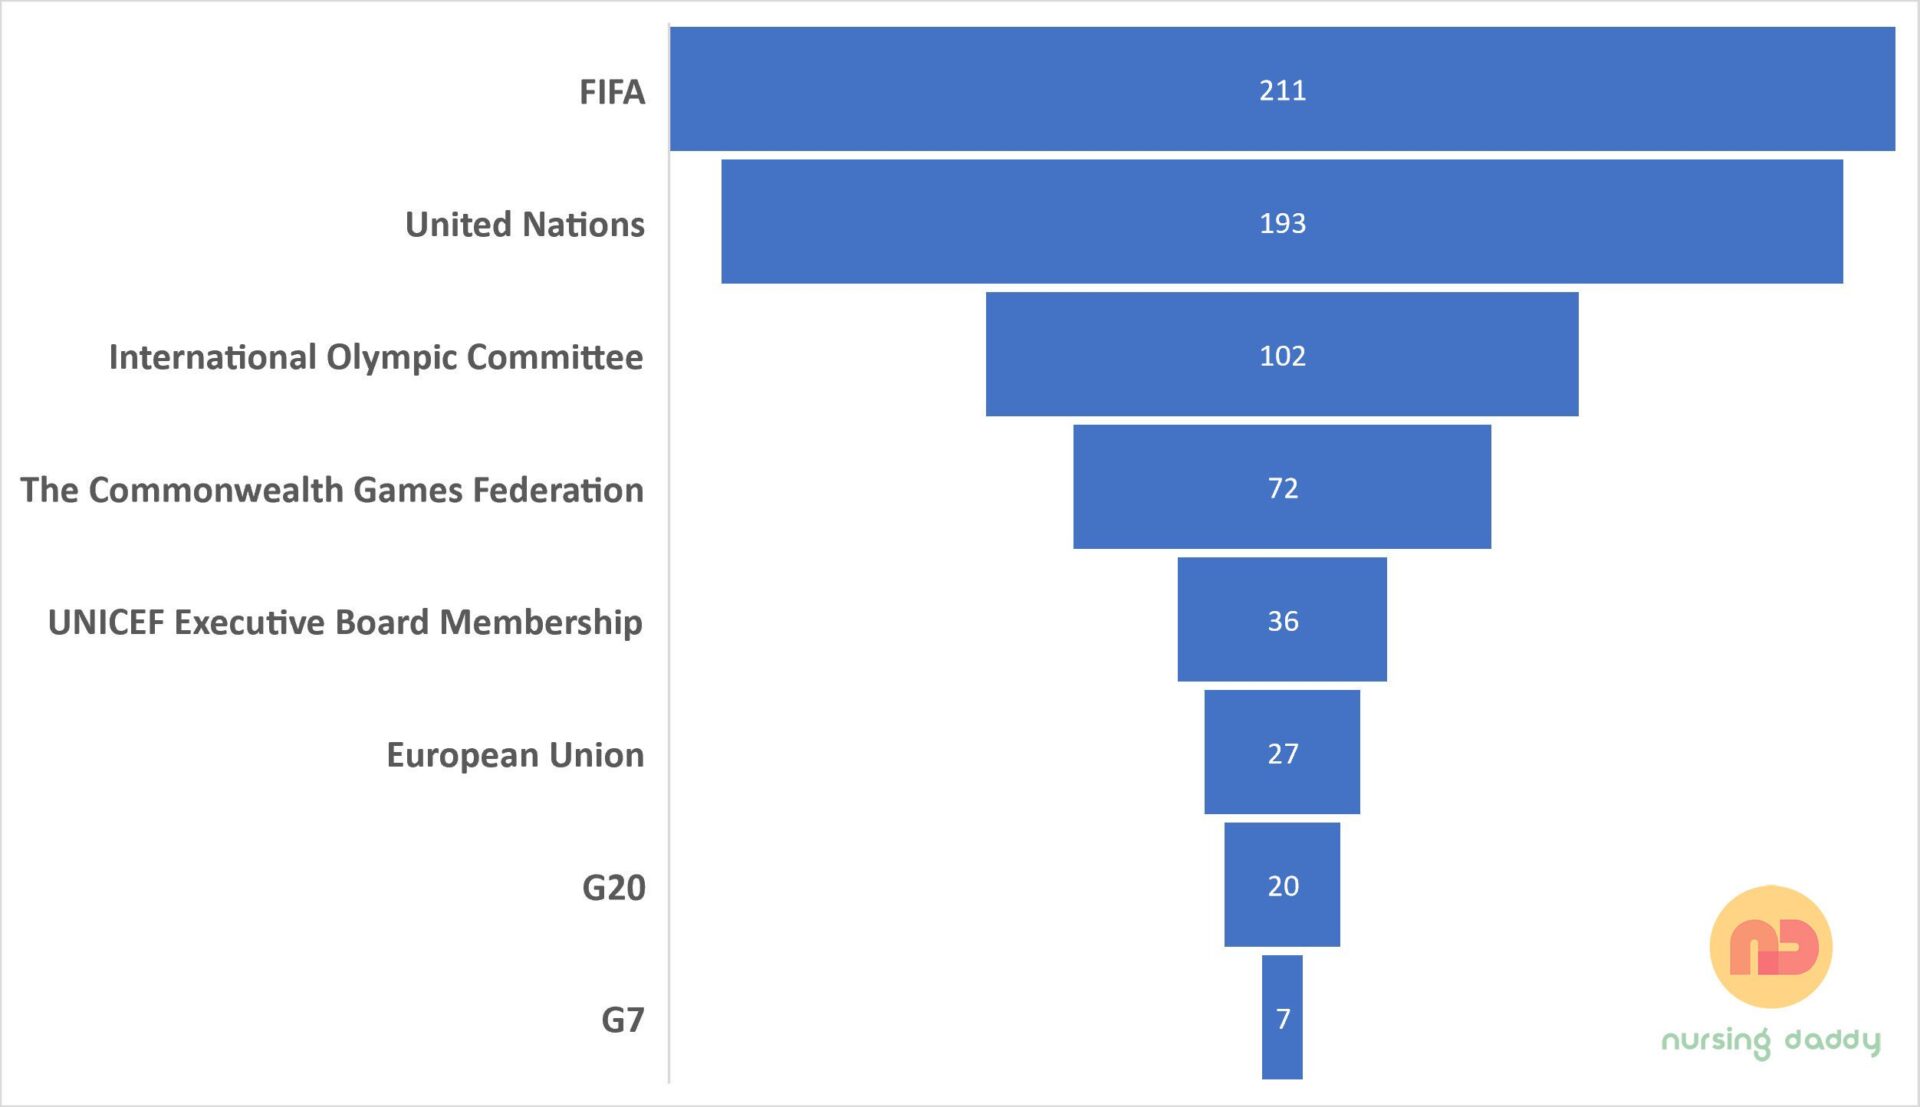 List of Notable World Organisation Against FIFA to support why Qatar merits The FIFA World Cup 2022